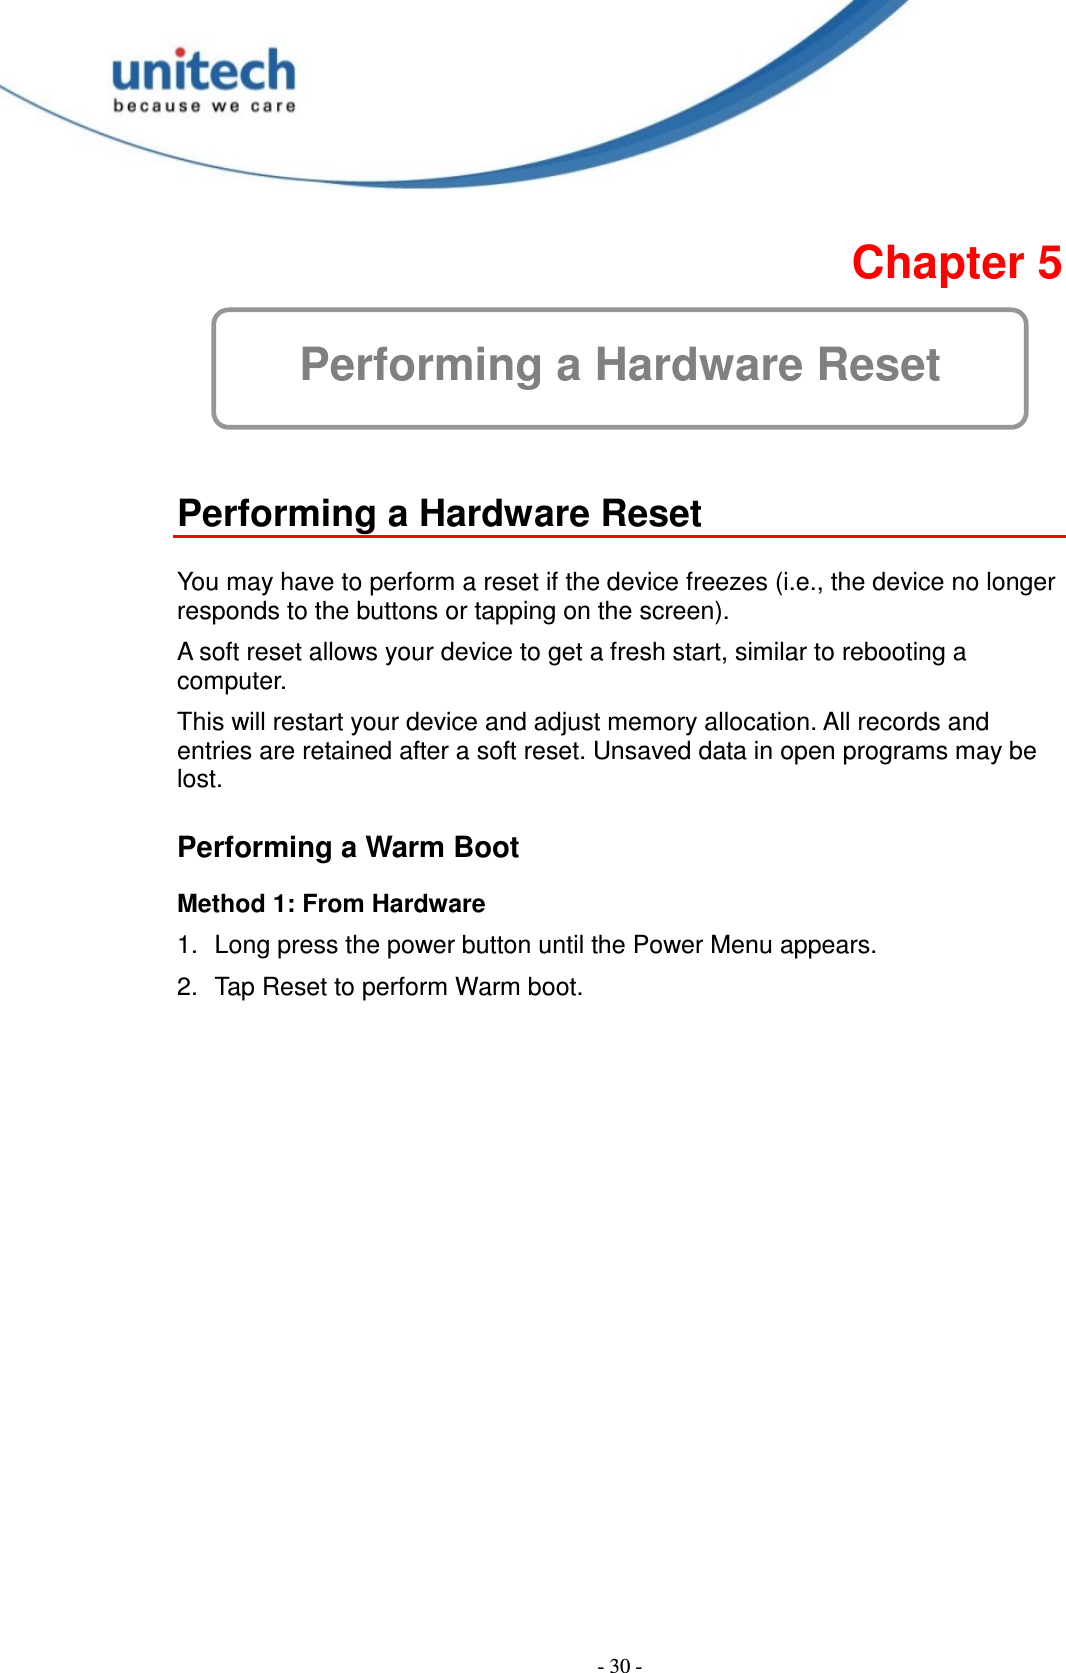  - 30 -  Chapter 5 Performing a Hardware Reset   Performing a Hardware Reset  You may have to perform a reset if the device freezes (i.e., the device no longer responds to the buttons or tapping on the screen). A soft reset allows your device to get a fresh start, similar to rebooting a computer. This will restart your device and adjust memory allocation. All records and entries are retained after a soft reset. Unsaved data in open programs may be lost. Performing a Warm Boot Method 1: From Hardware 1.  Long press the power button until the Power Menu appears. 2.  Tap Reset to perform Warm boot.       